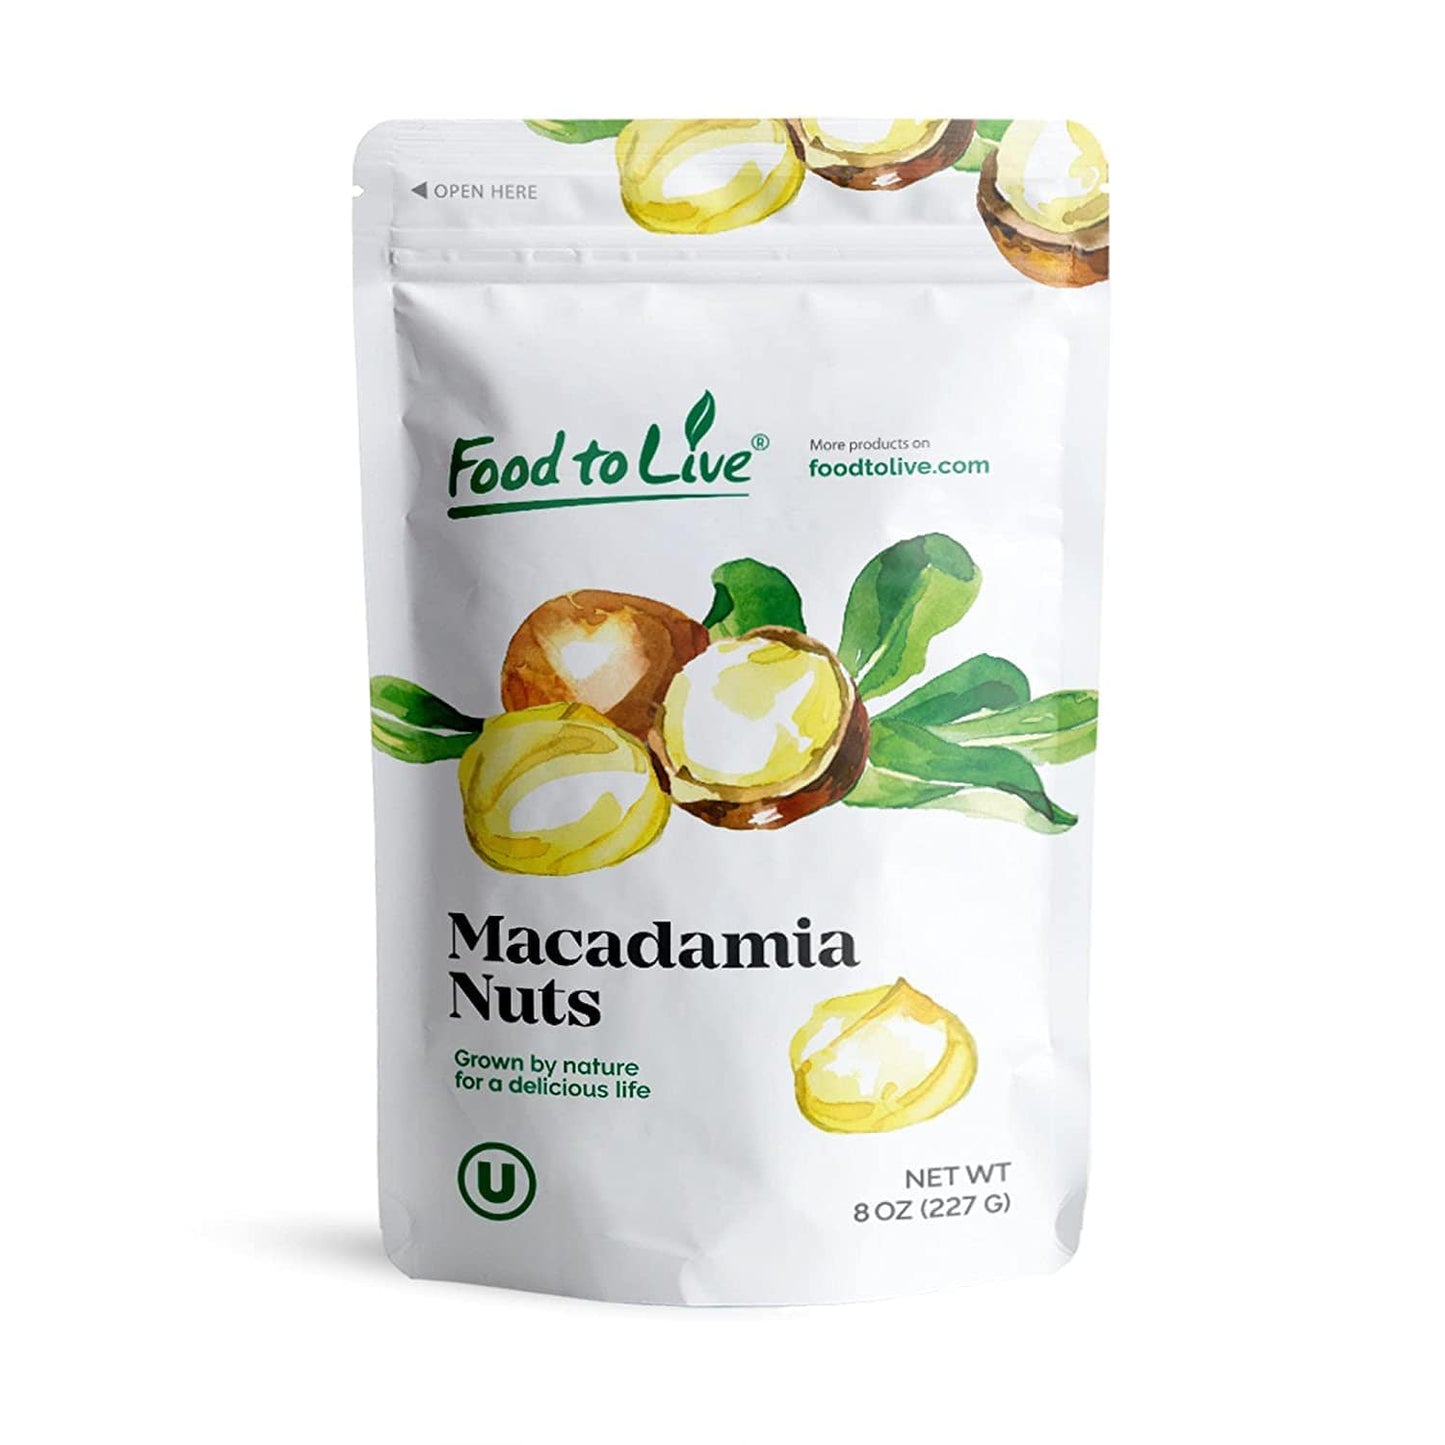 Dry Roasted Macadamia Nuts with Himalayan Salt, X Pounds – Oven Roasted Whole Nuts, Lightly Salted, No Oil Added, Vegan Snack, Keto, Kosher, Bulk. High in Protein and Healthy Fats. Great for Baking